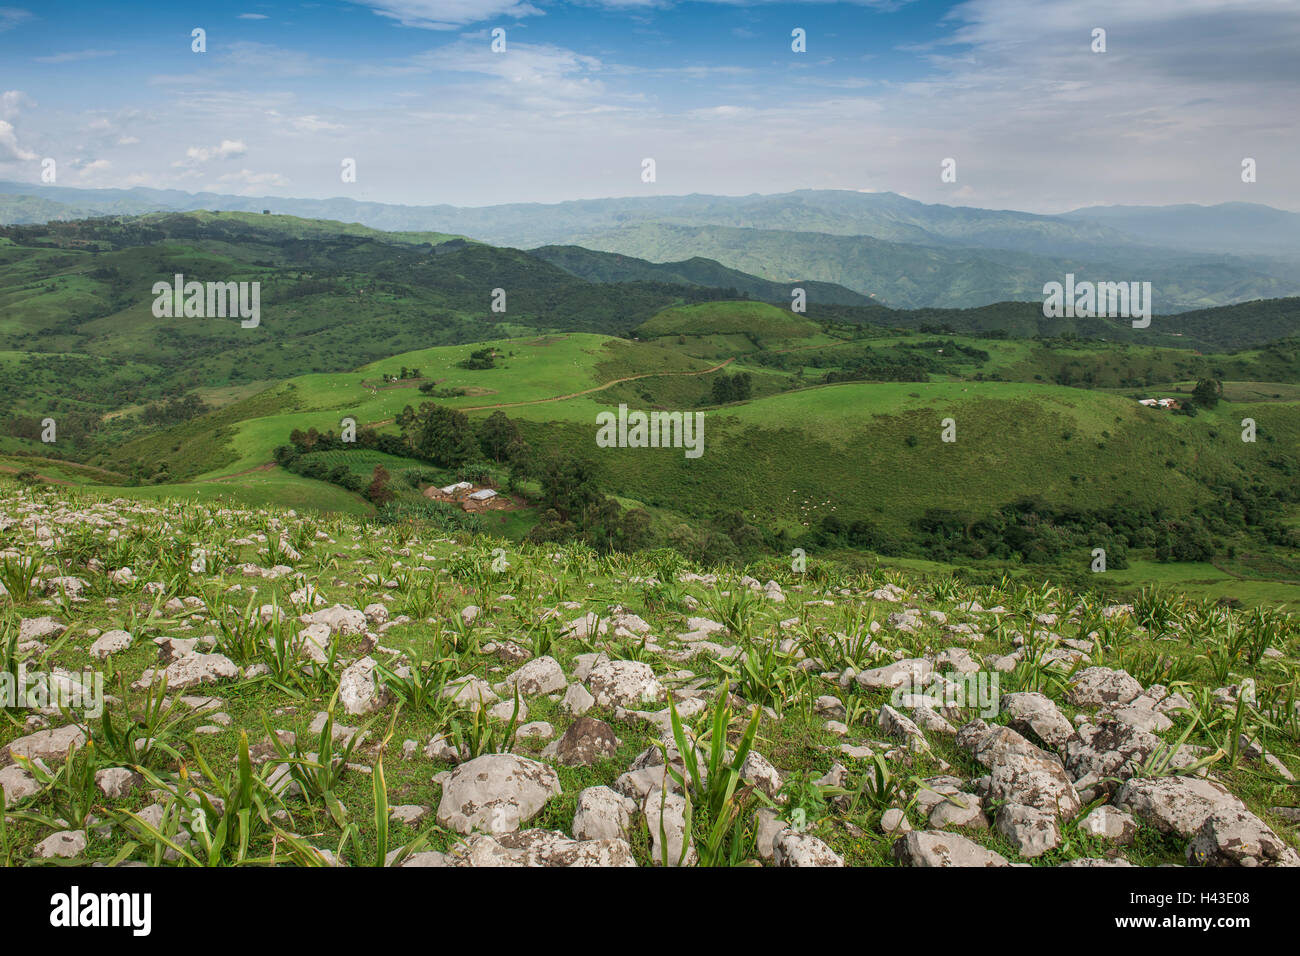 Landscape with clouds and sky, Fundong, North-West Region, Cameroon Stock Photo